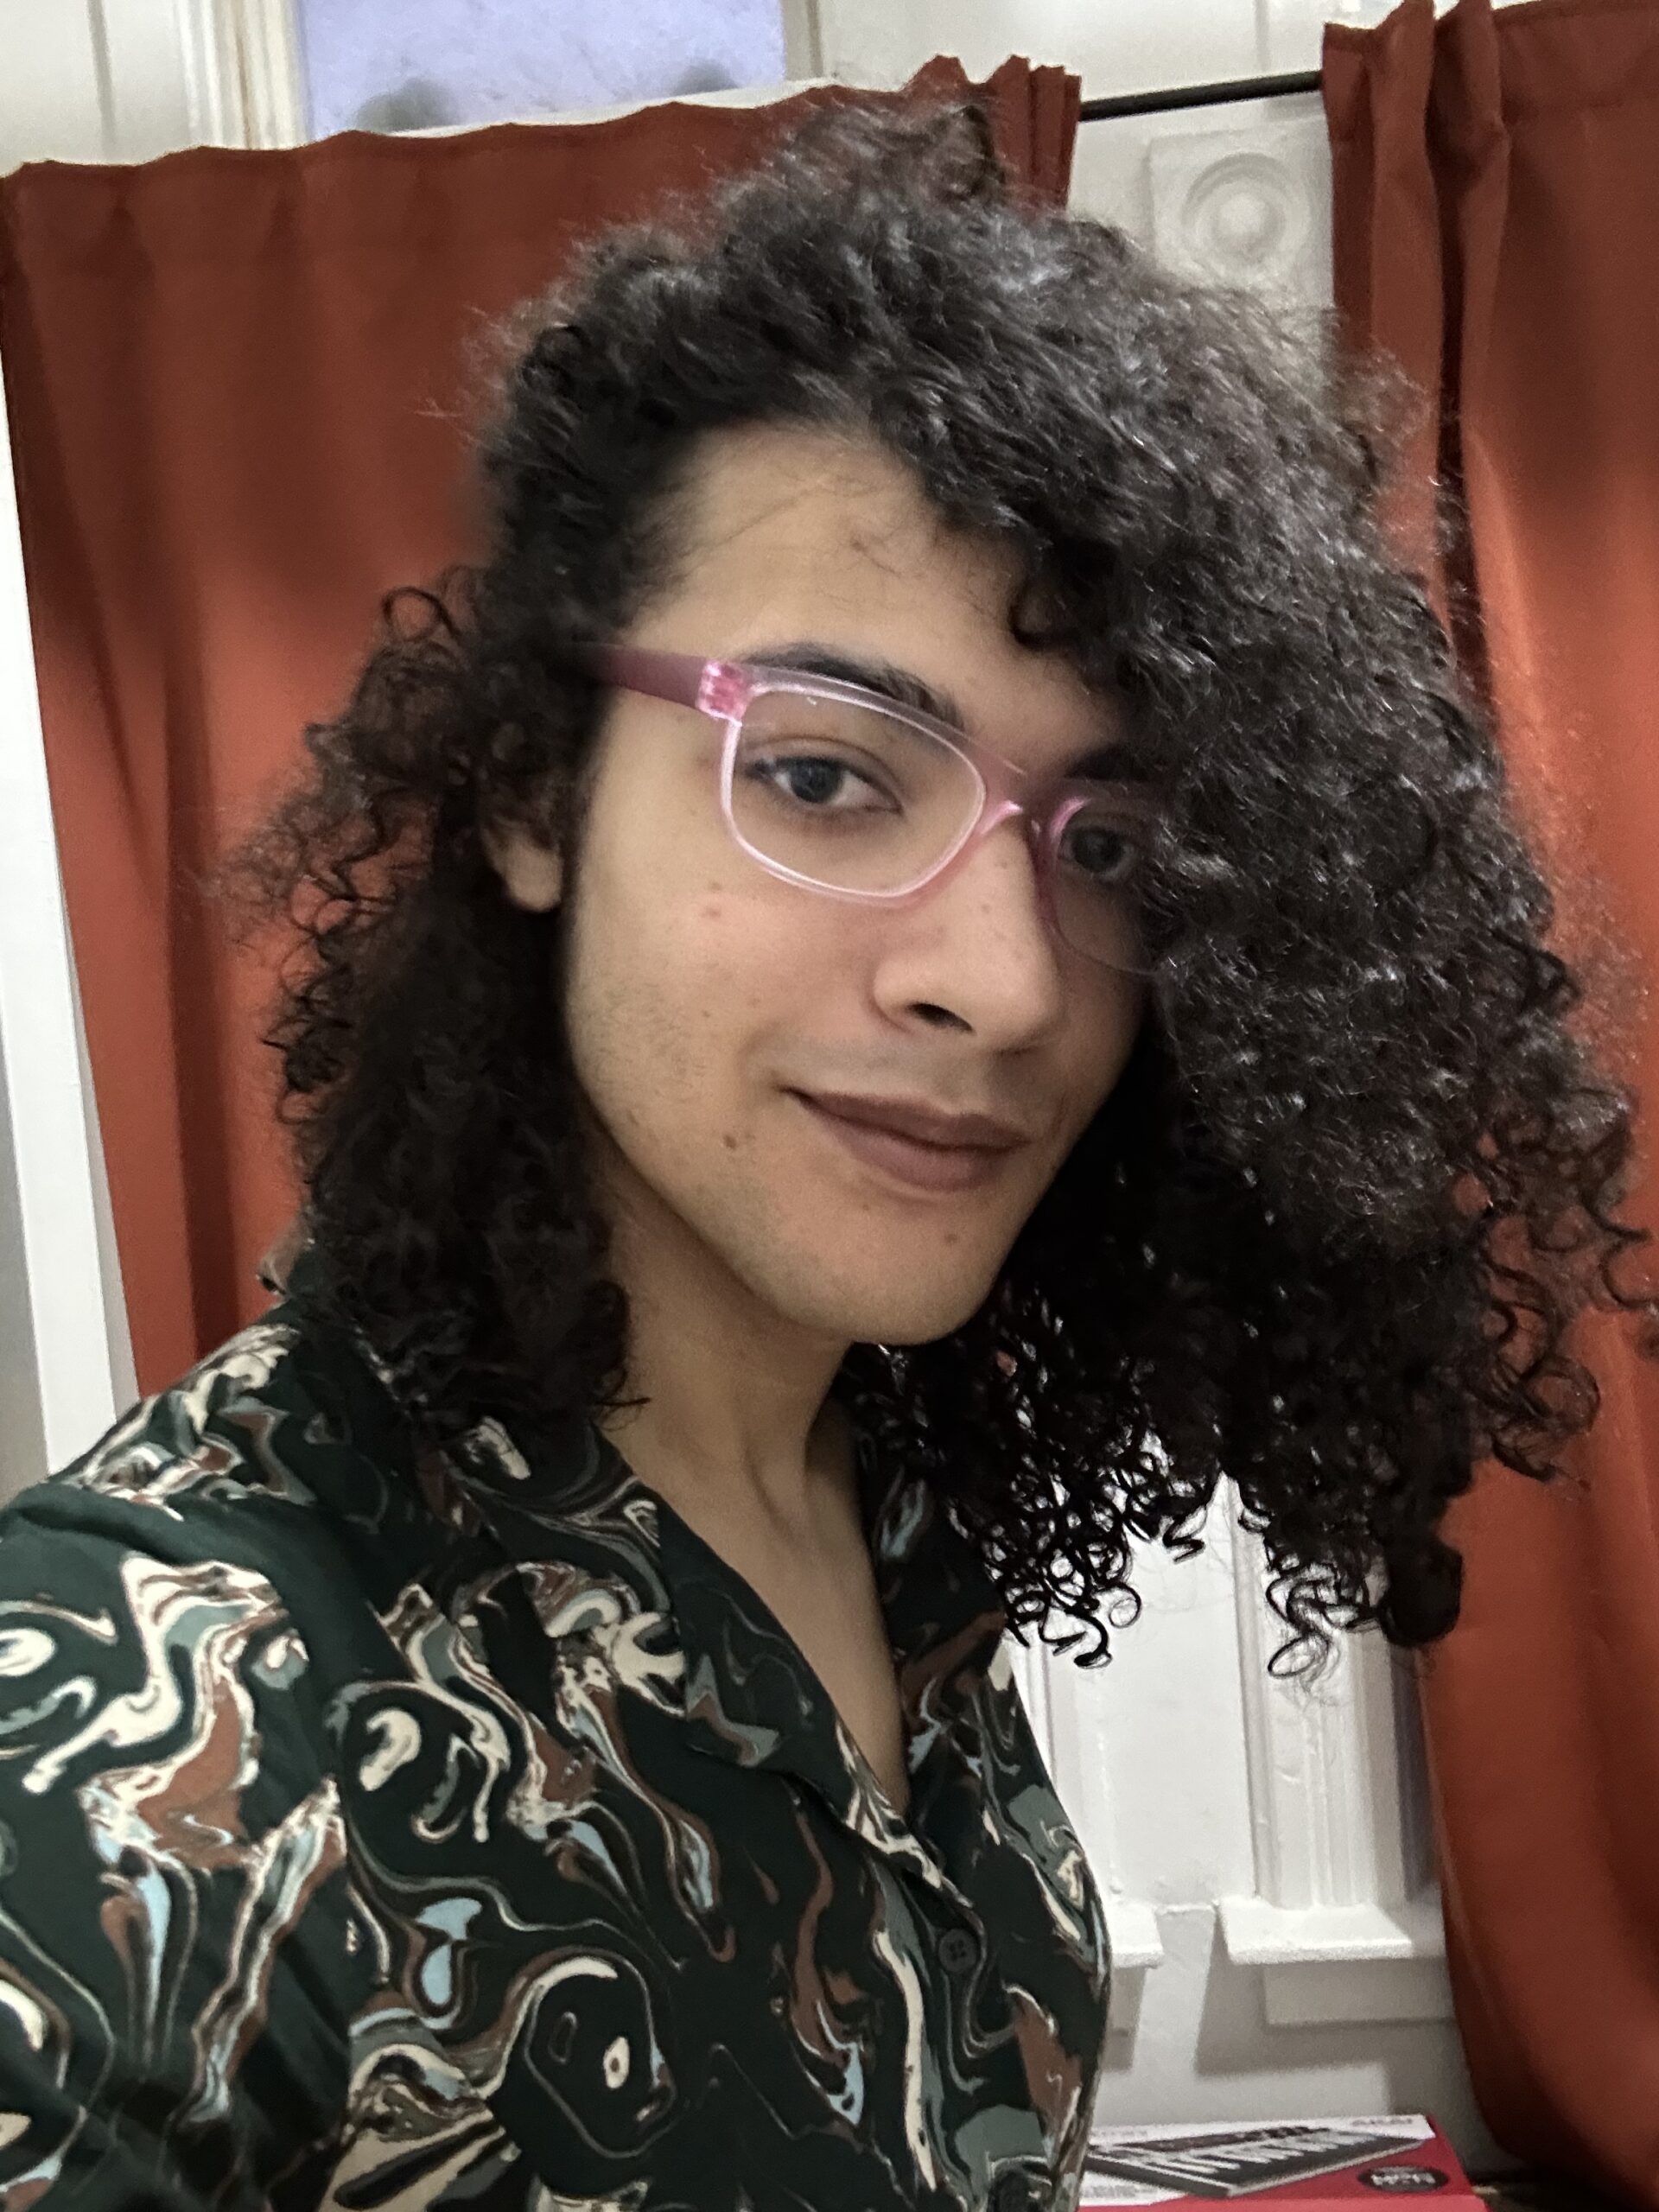 A light brown-skinned trans woman wearing a leafy-patterned dark green dress, pink square glasses, and brown lipstick leaning to the camera in 3/4 view with a slight smile. She has shoulder length, fro'ed black hair.